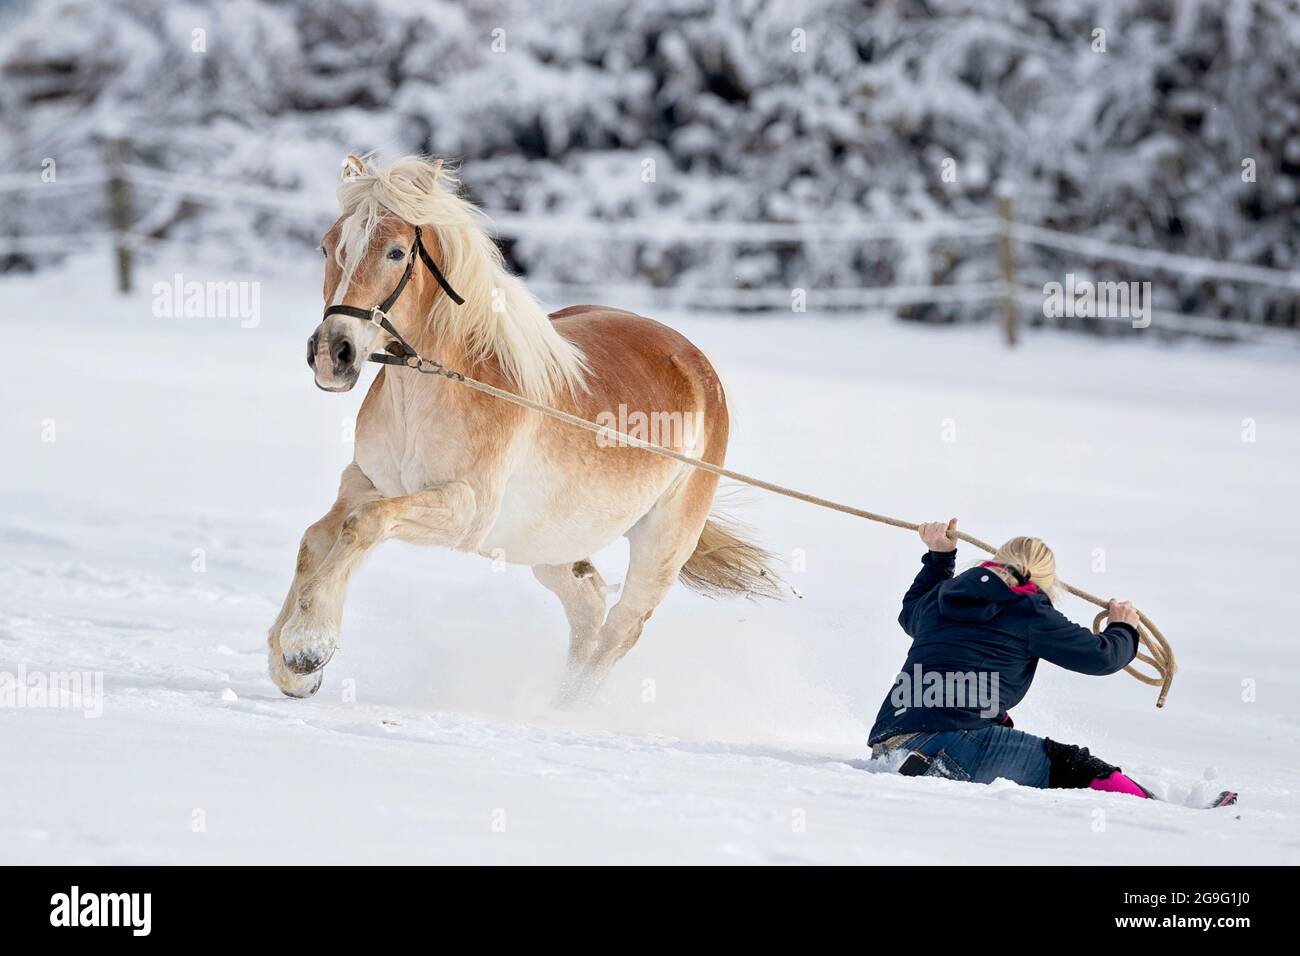 Haflinger Horse resists to be lead and bolts. Austria Stock Photo